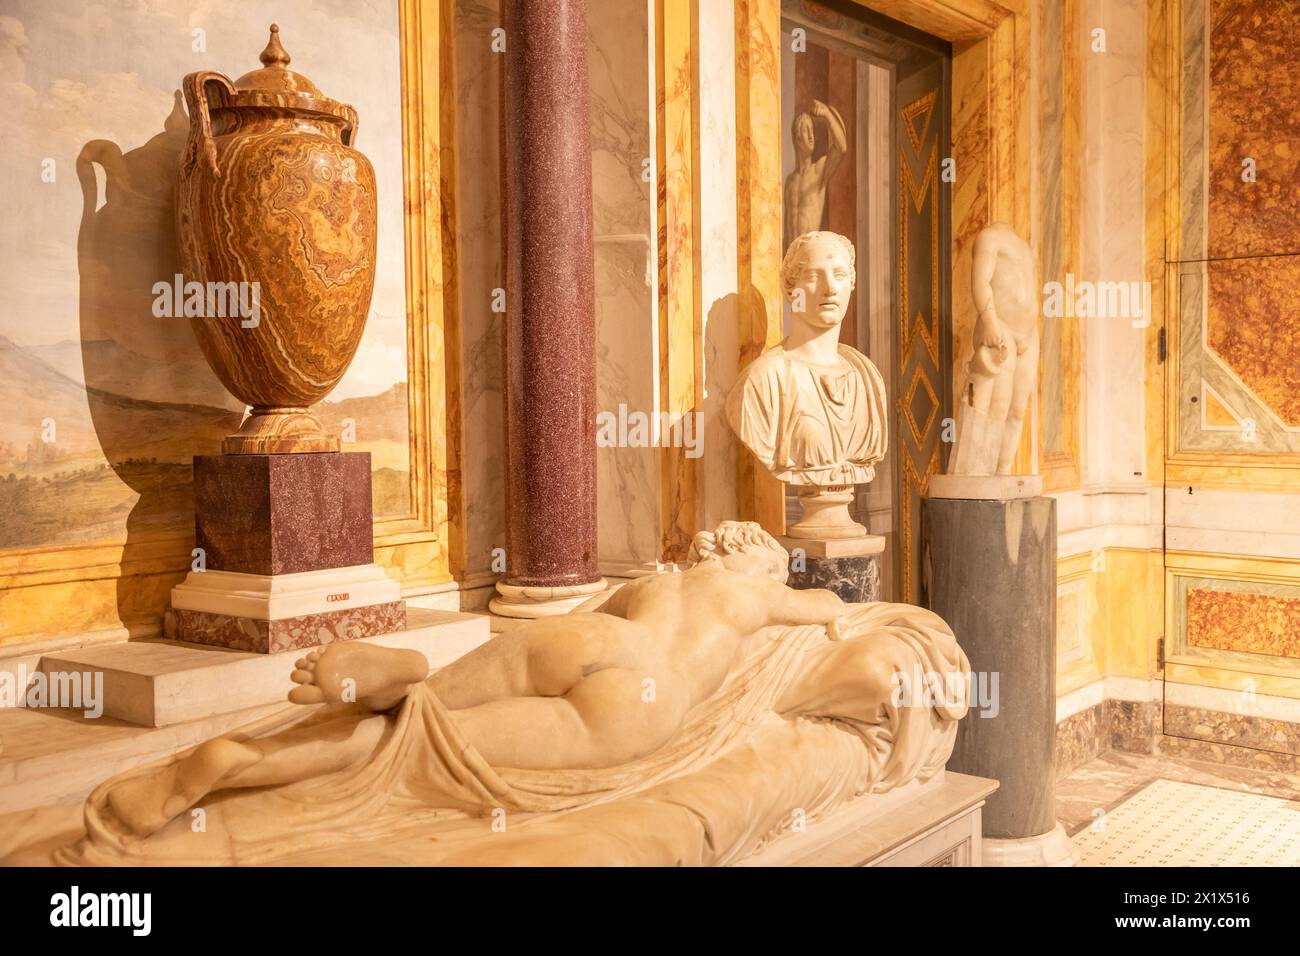 Rome, Italy - 28 December 2023: Galleria Borghese - Borghese Gallery - ancient art museum interior, sculptures in white marble Stock Photo